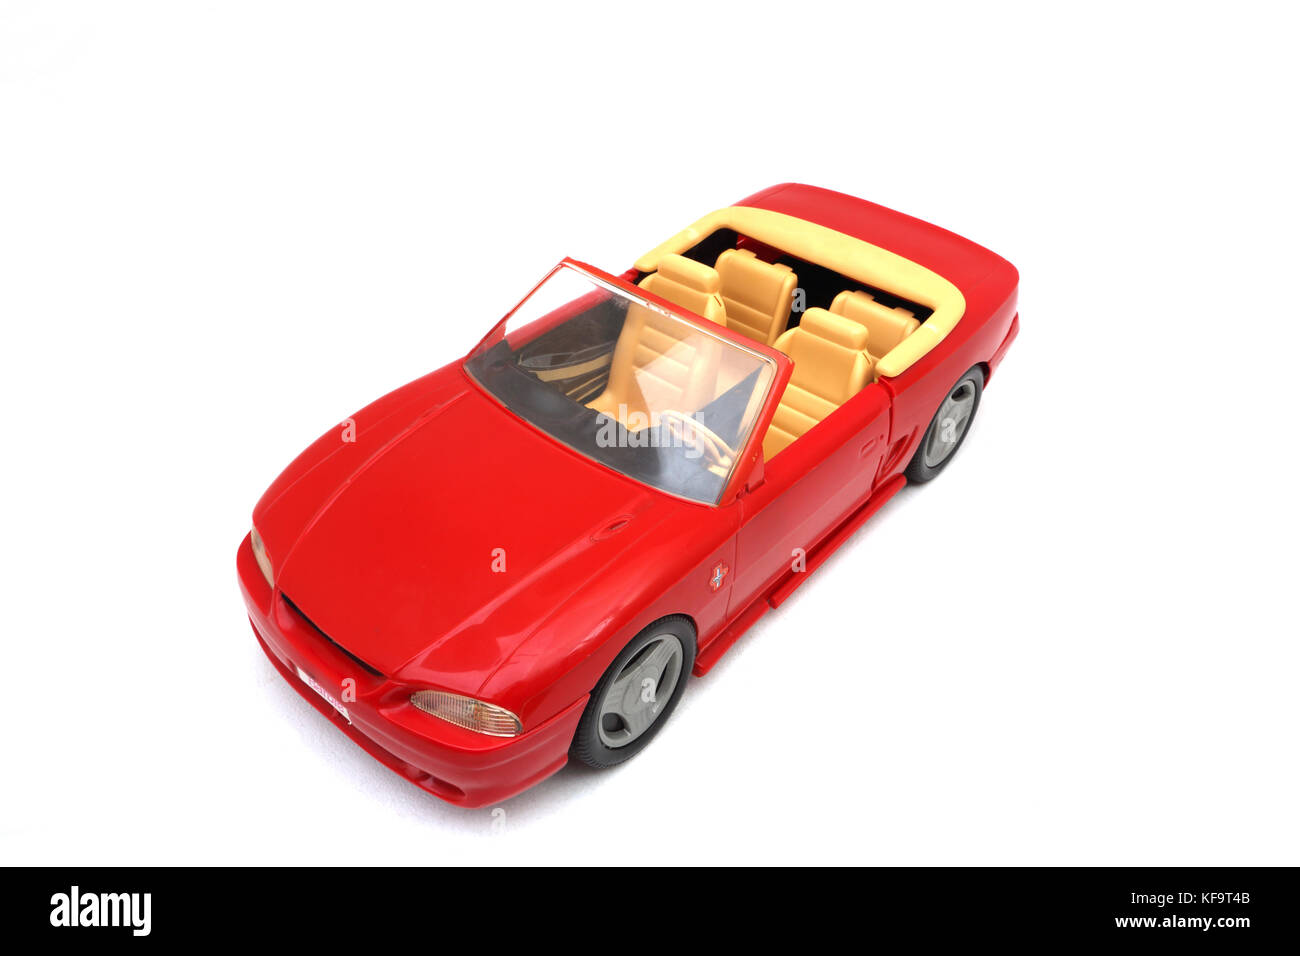 Vintage 1990's Toy Ford Mustang Barbie Convertible Car Stock Photo - Alamy